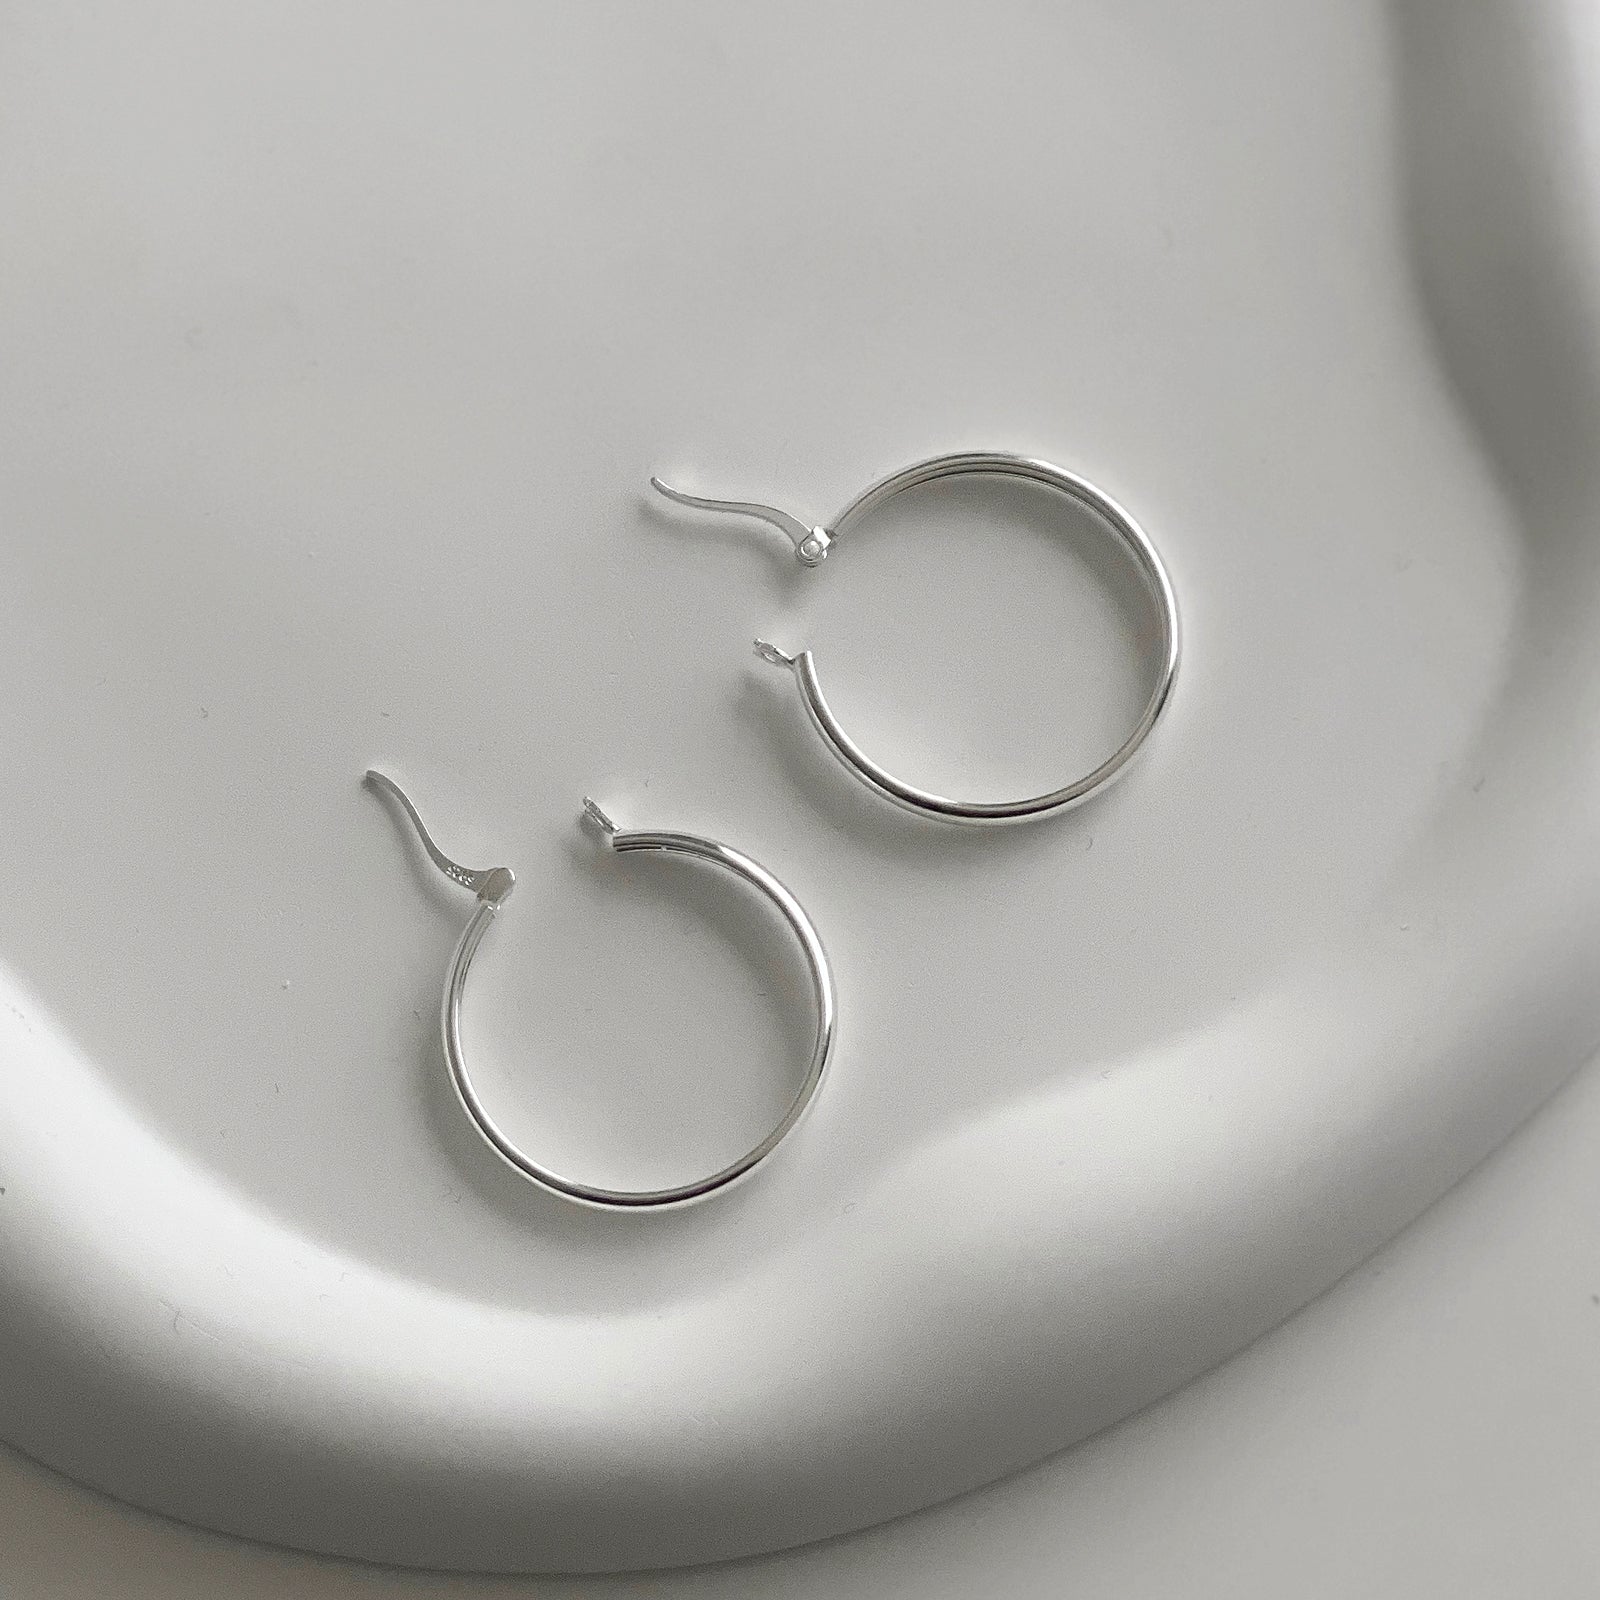 Open view of Jane Hoops size 30mm. These are classic hoop earrings with a latch back for closure. Has a S925 stamp on the latch. These hoop earrings are made of 925 Sterling Silver and has a smooth and shiny finish.